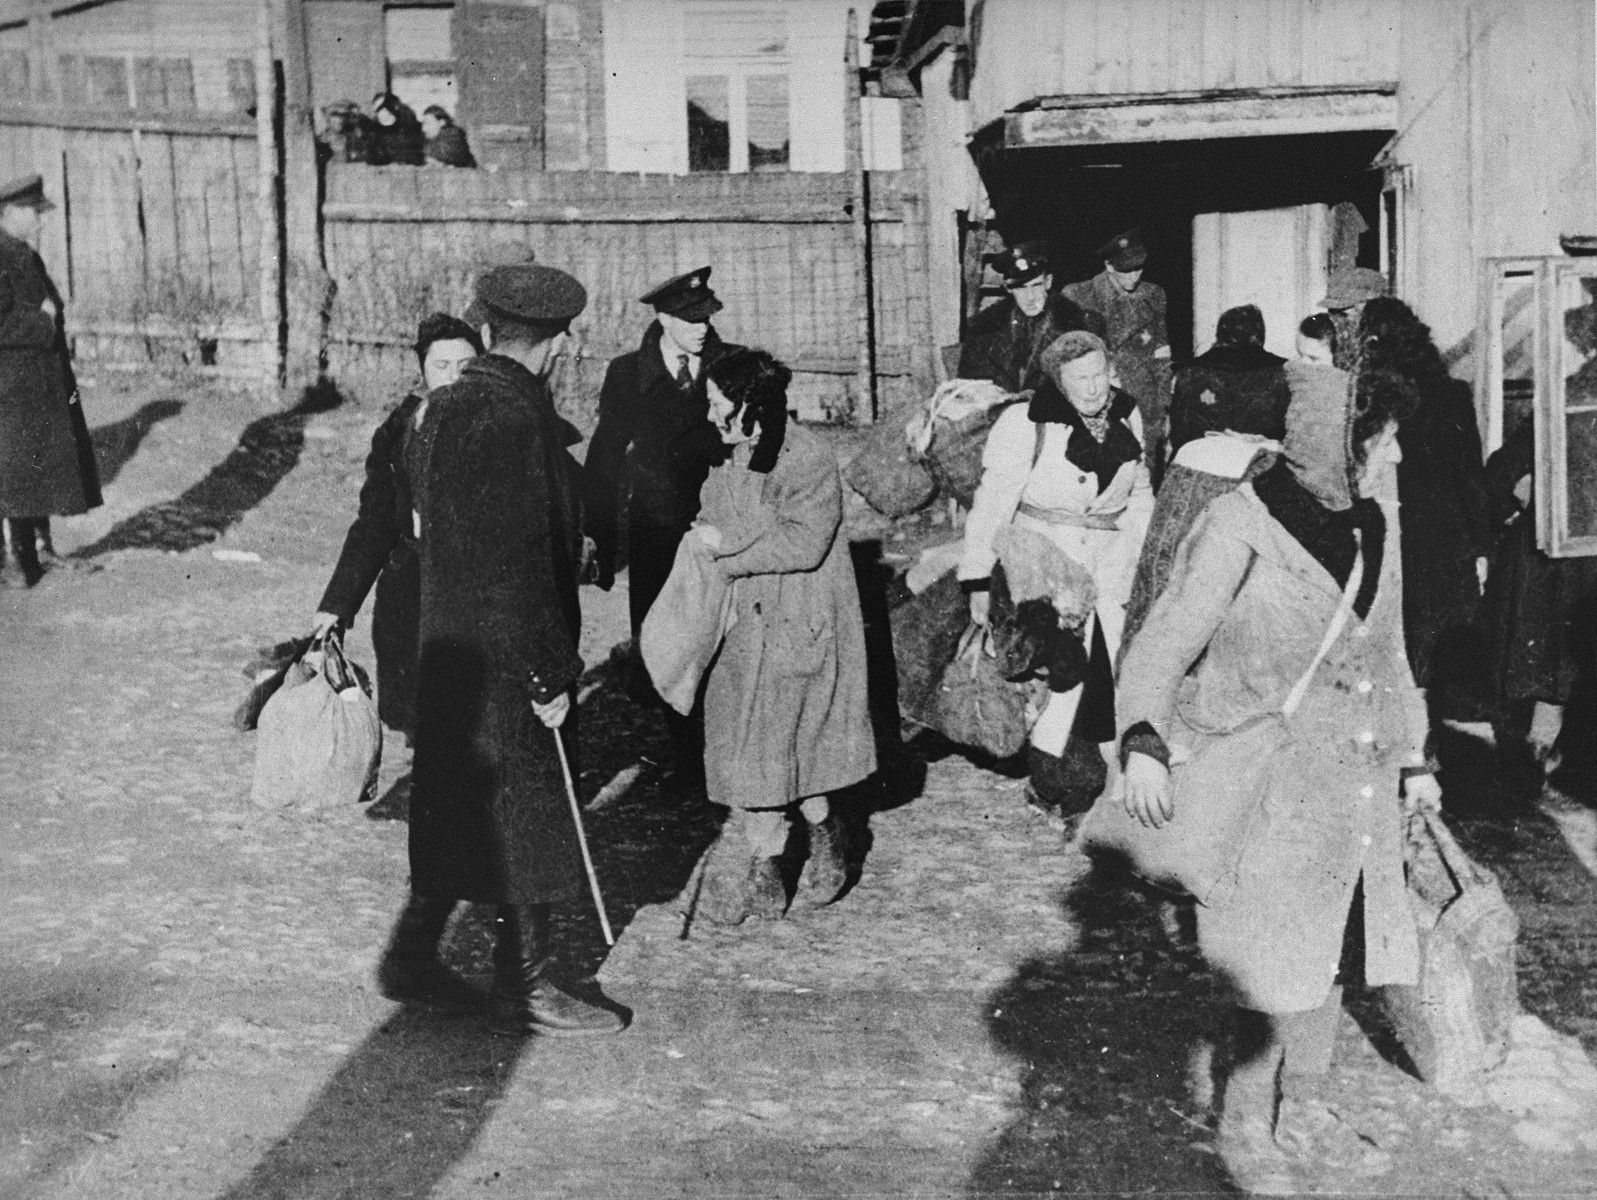 Jewish police direct people to the assembly area in the Kovno ghetto during a deportation action to Estonia.

Photographer George Kadish captioned the photo  "Transfer to nowhere".